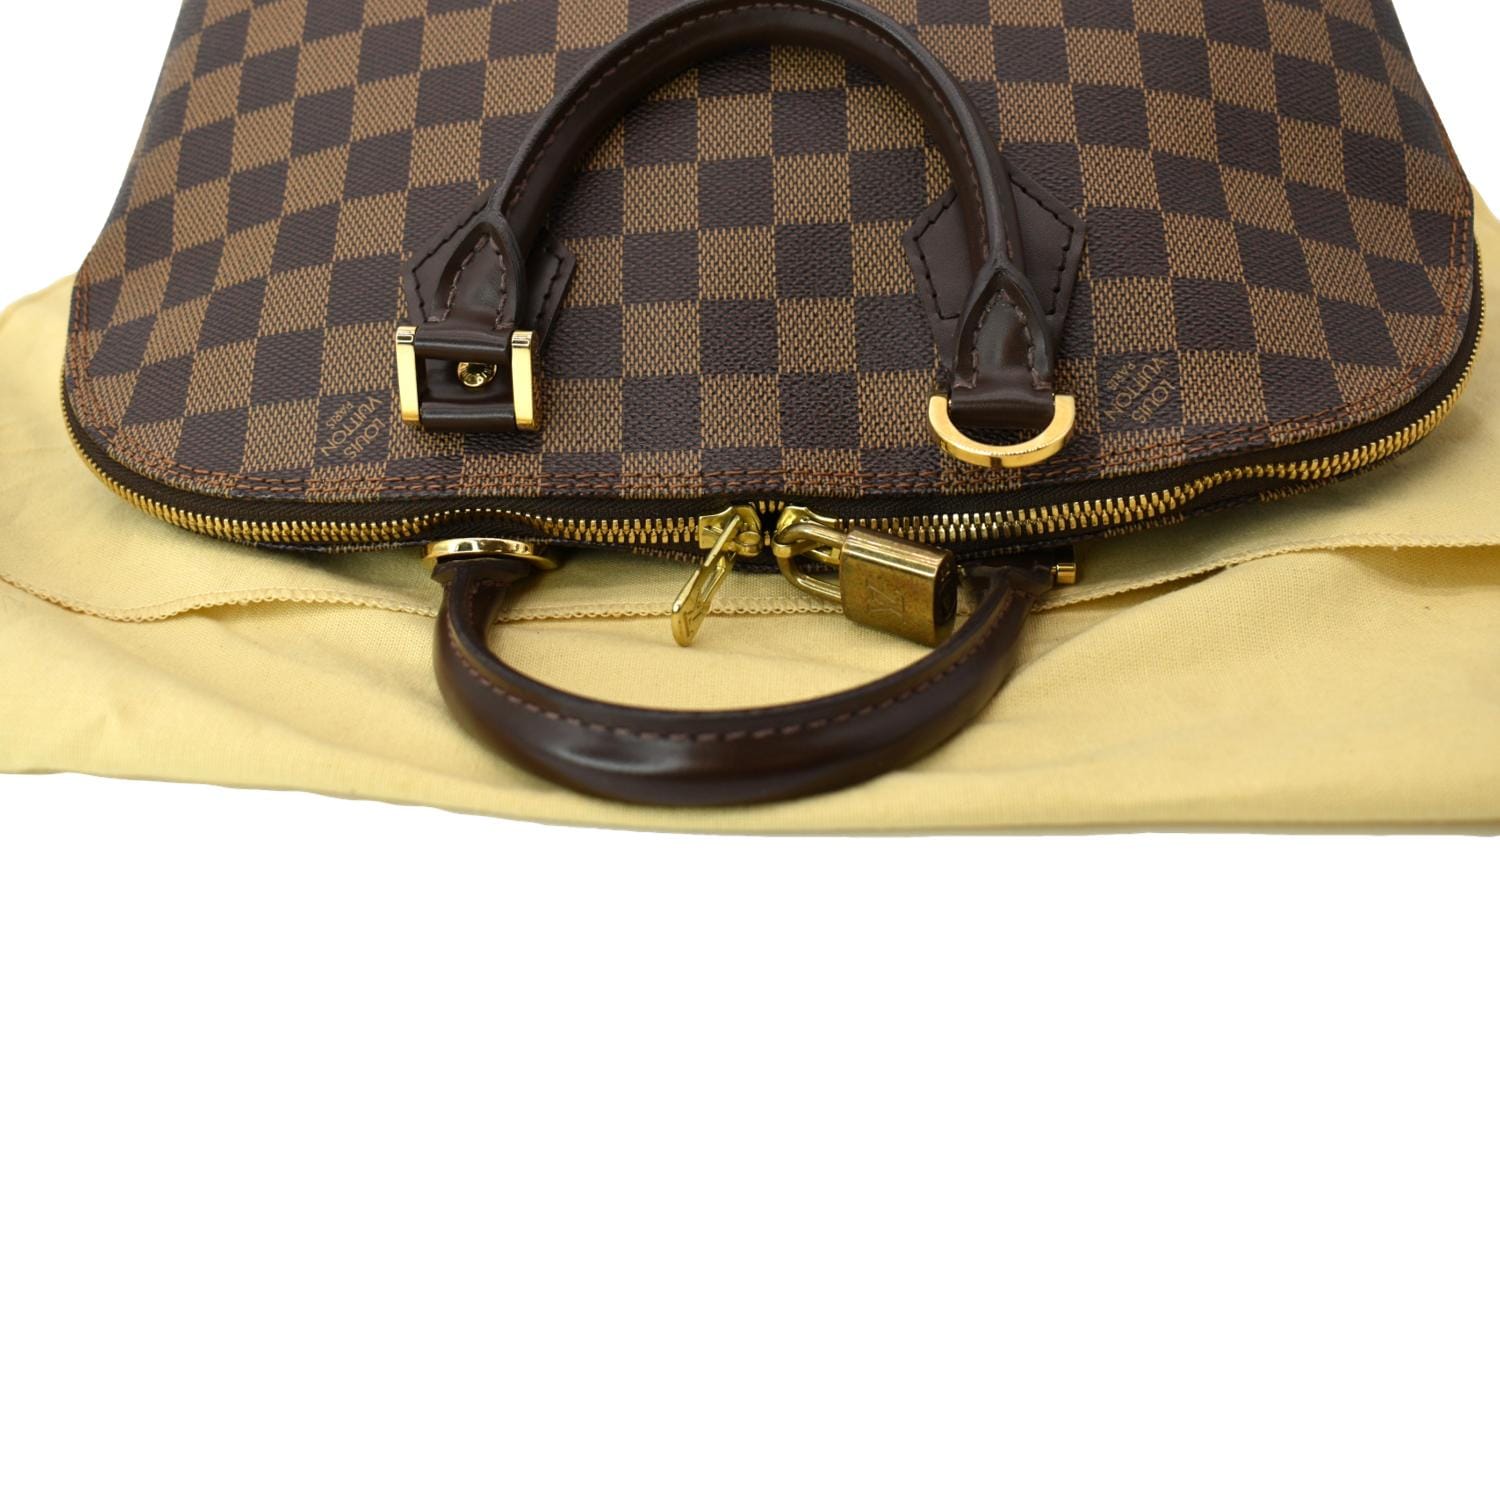 Where Is The Date Code On Louis Vuitton Speedy 255